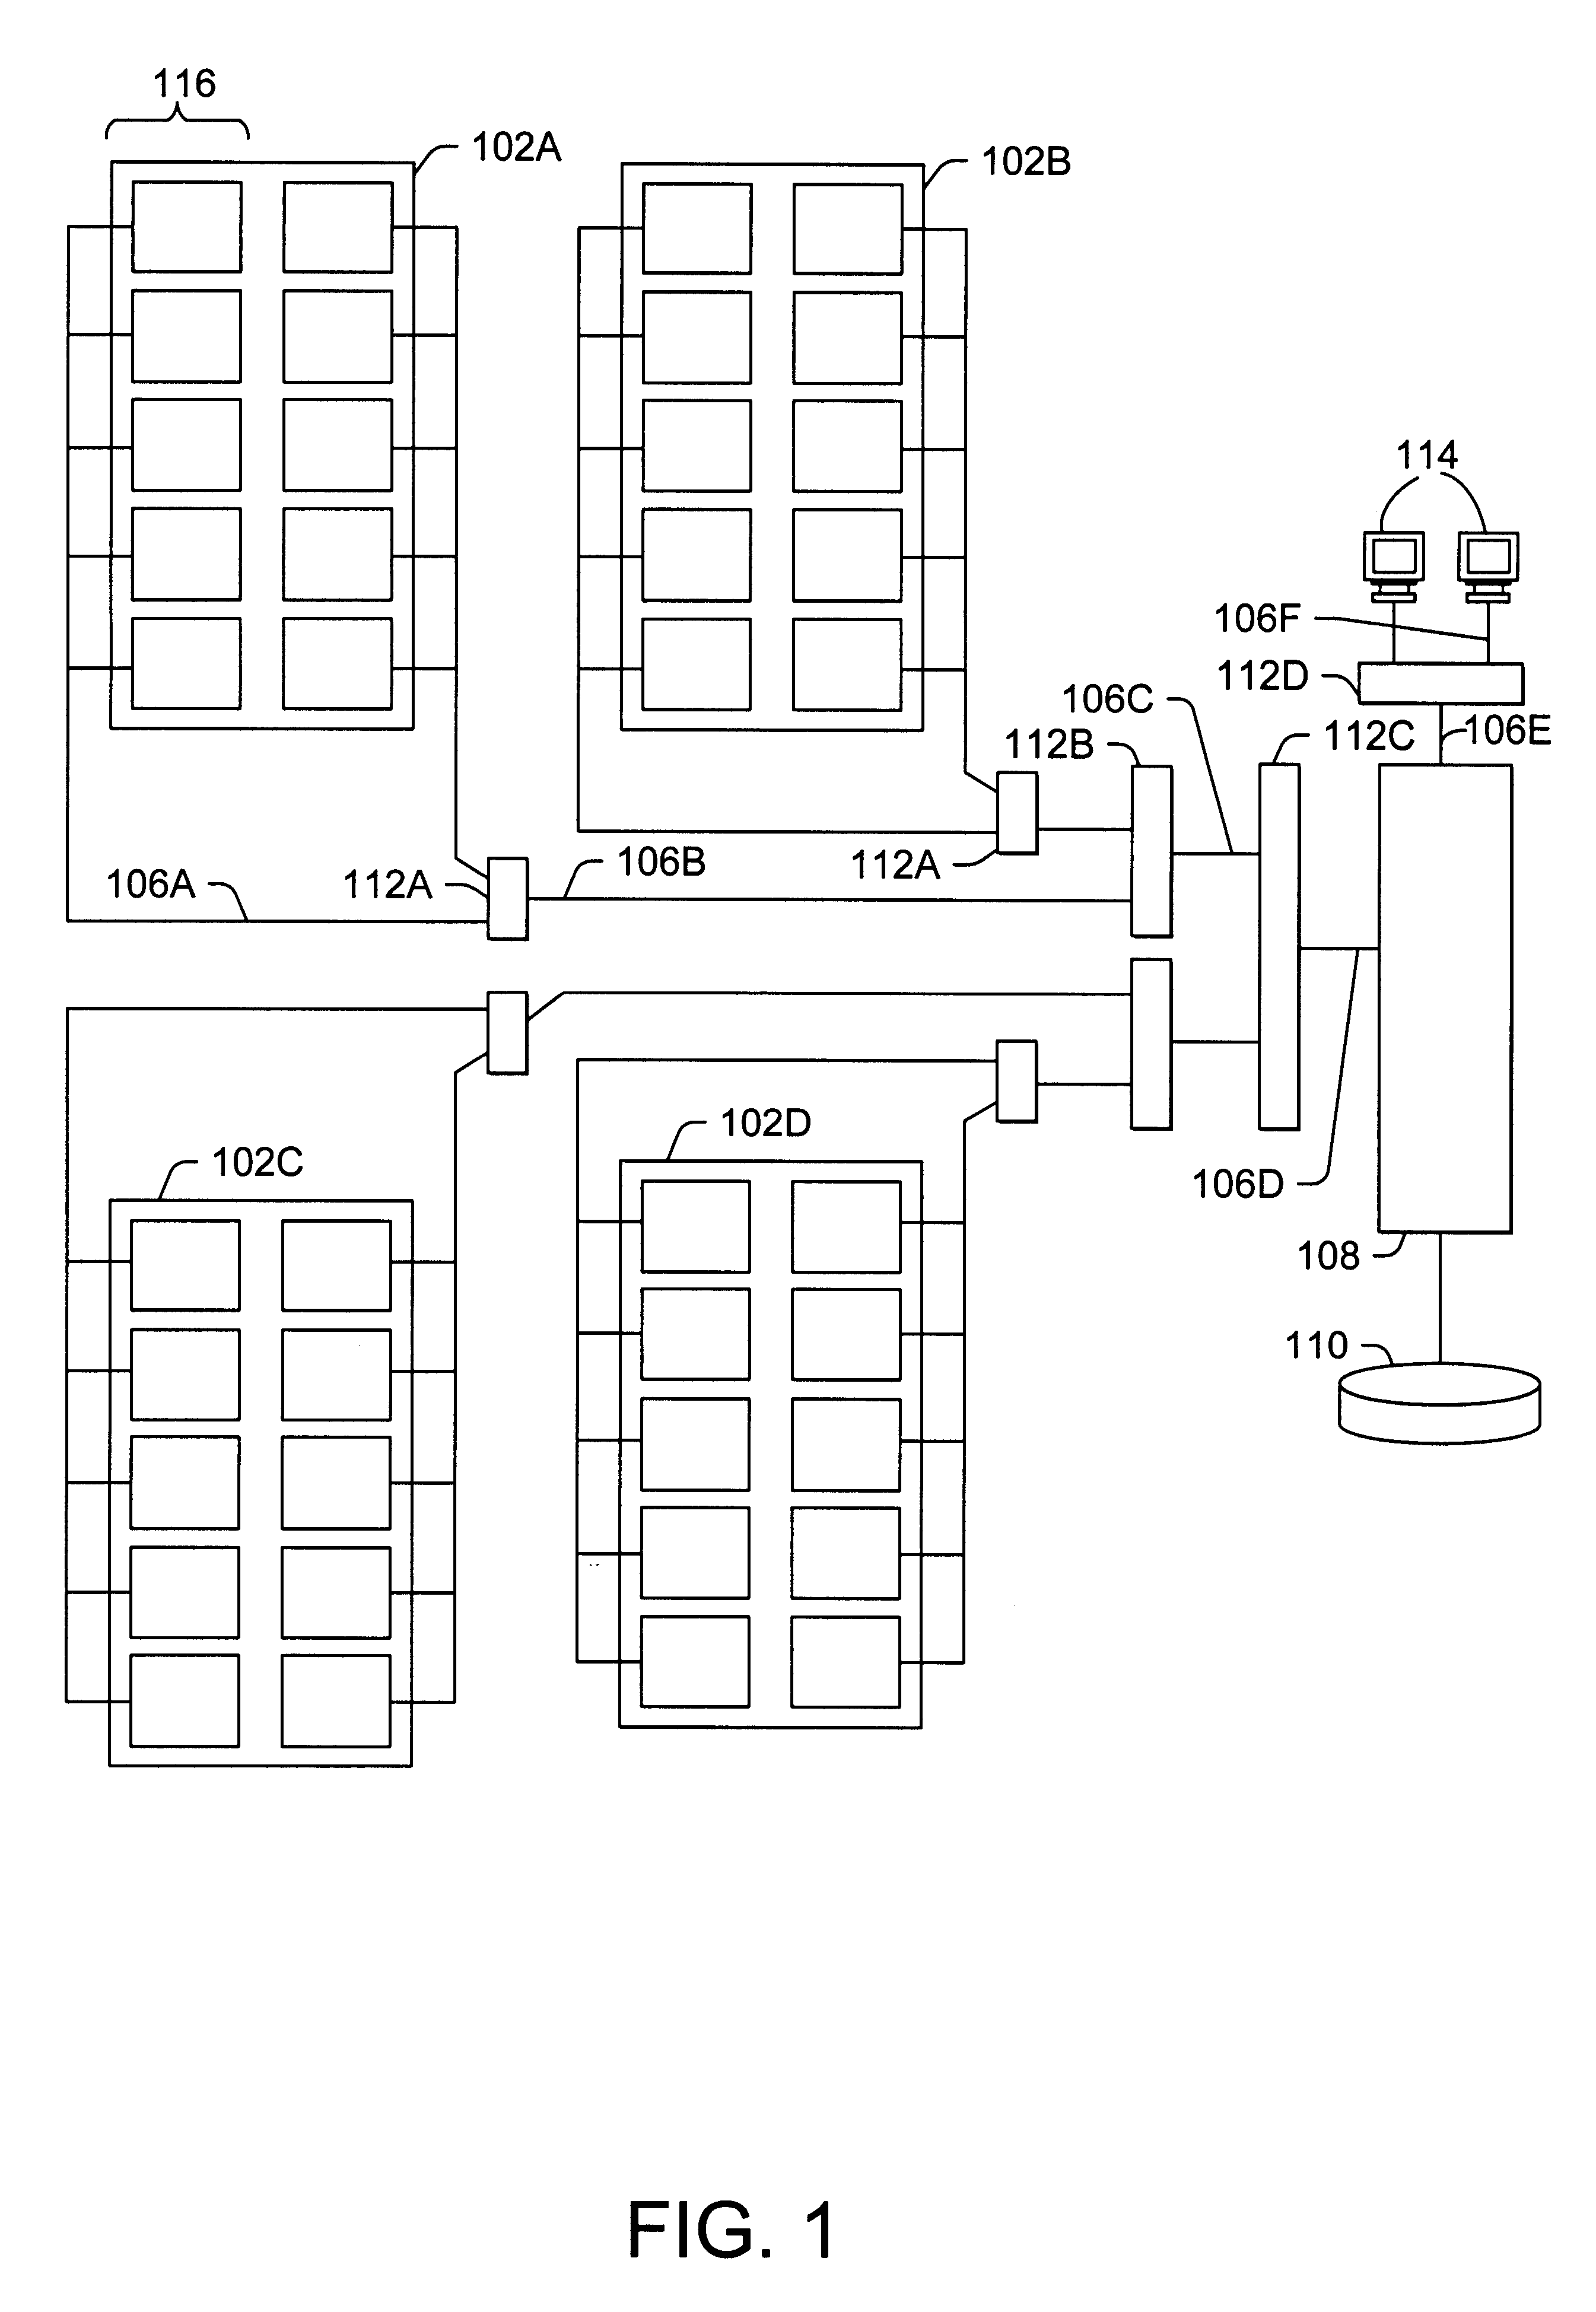 Method and apparatus for controlling a coin hopper to operate with a secondary monetary exchange dispenser